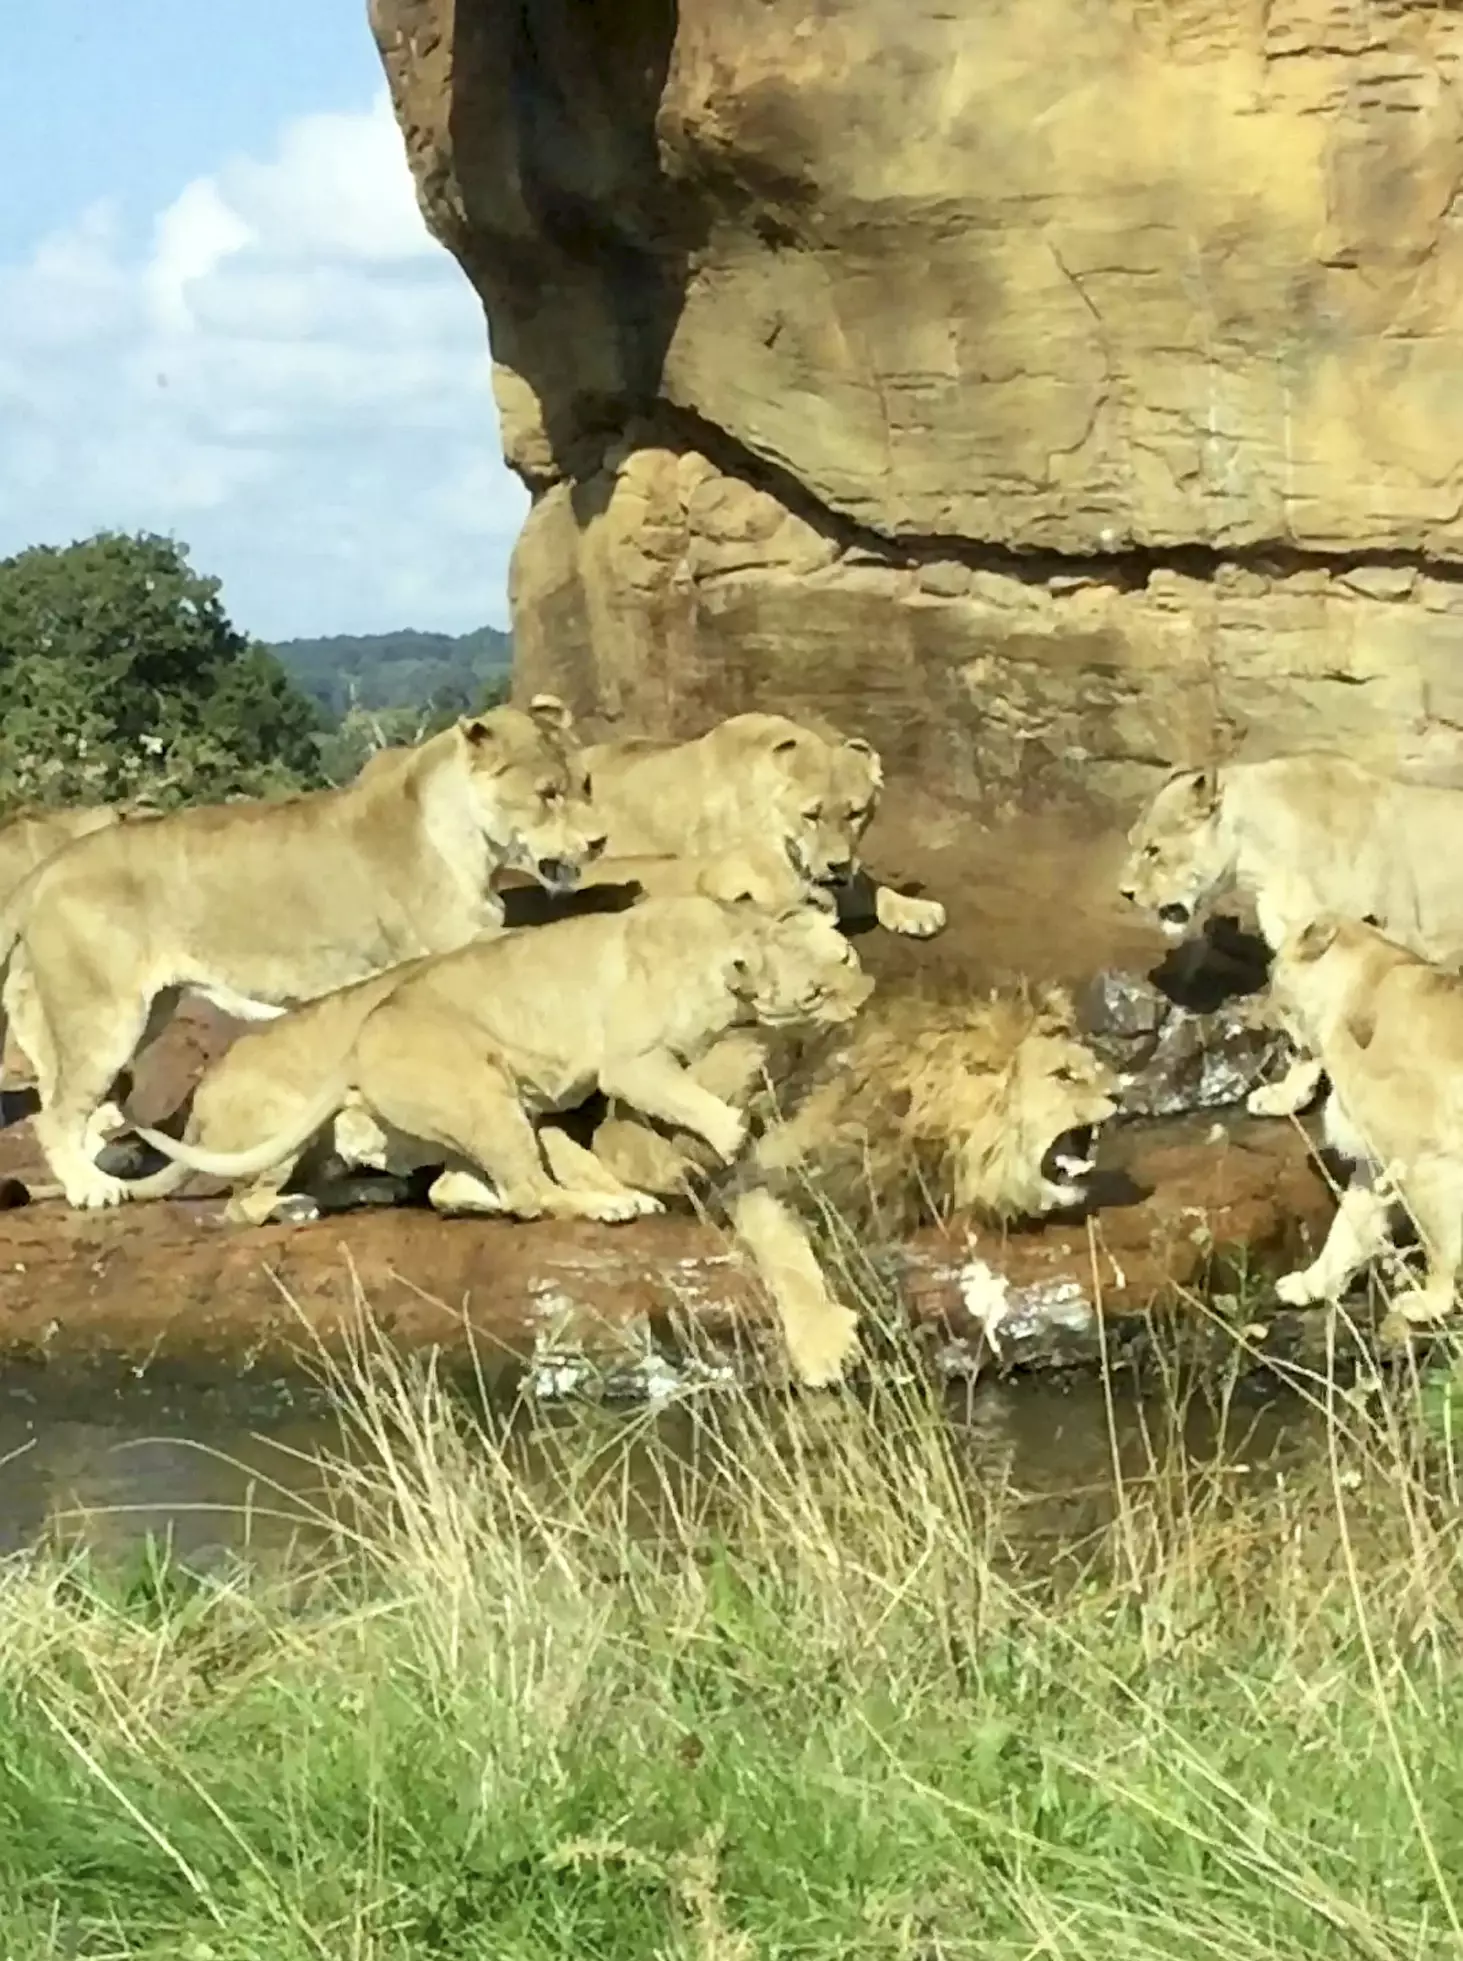 There were reportedly up to nine lionesses.